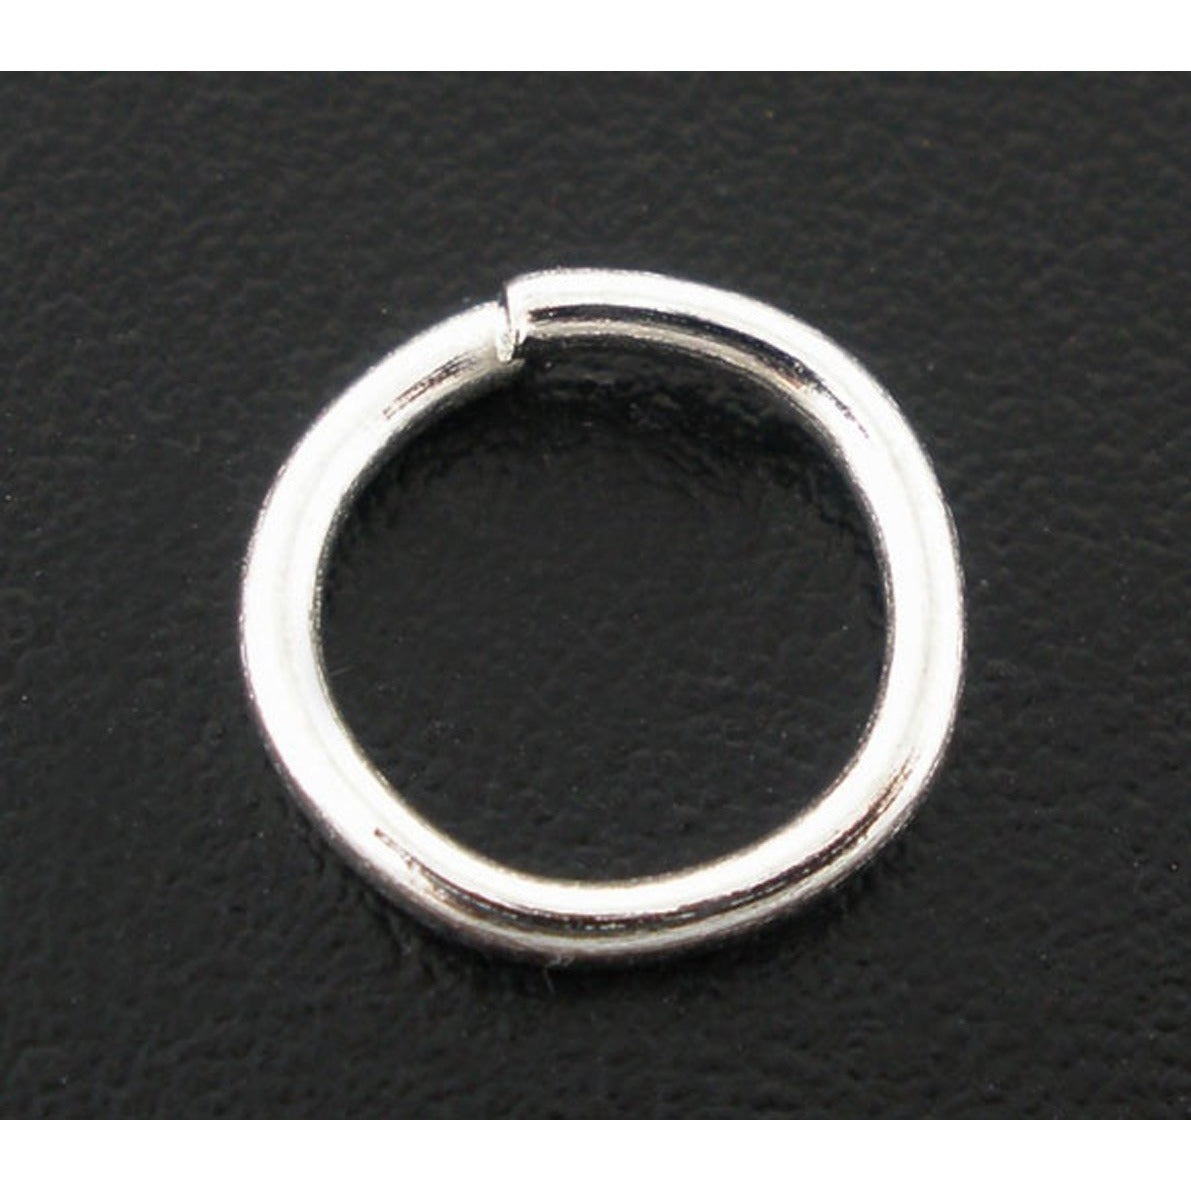 11mm Large Silver Jump Rings, Textured Jump Ring, Jump Rings, 10 Rings,  PW-3002 -  Norway